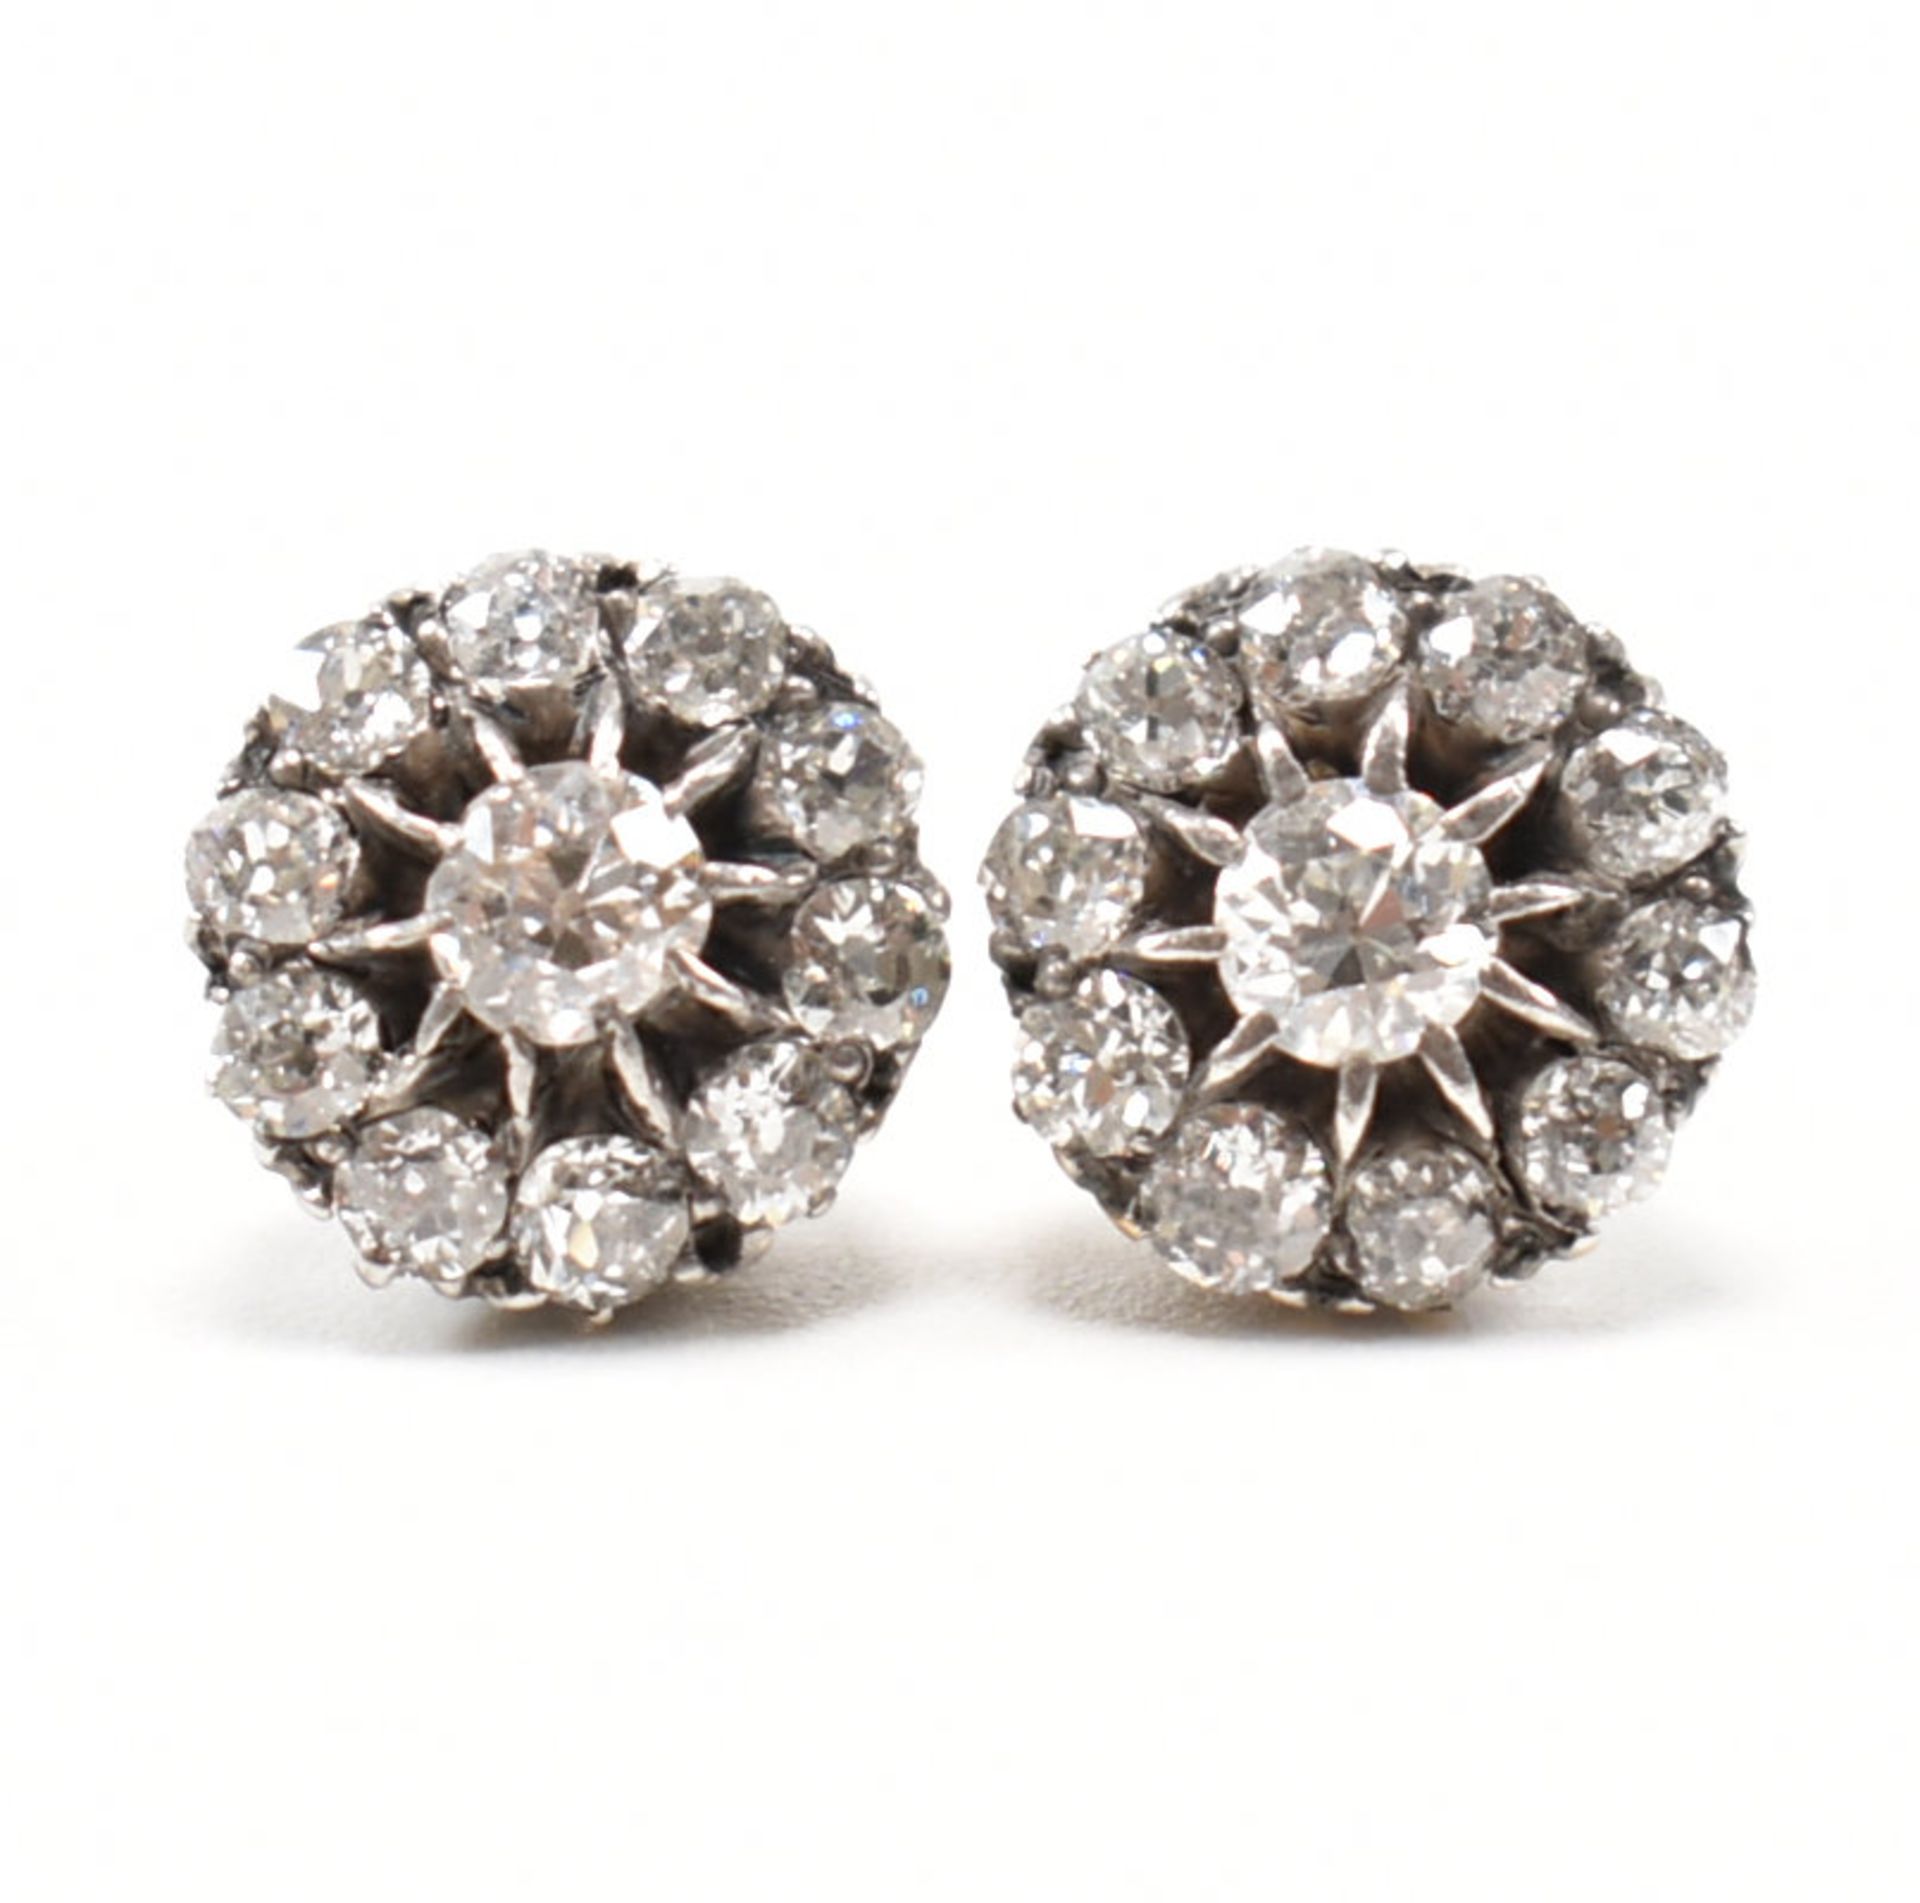 PAIR OF 1920S GOLD & DIAMOND CLUSTER EARRINGS - Image 3 of 7